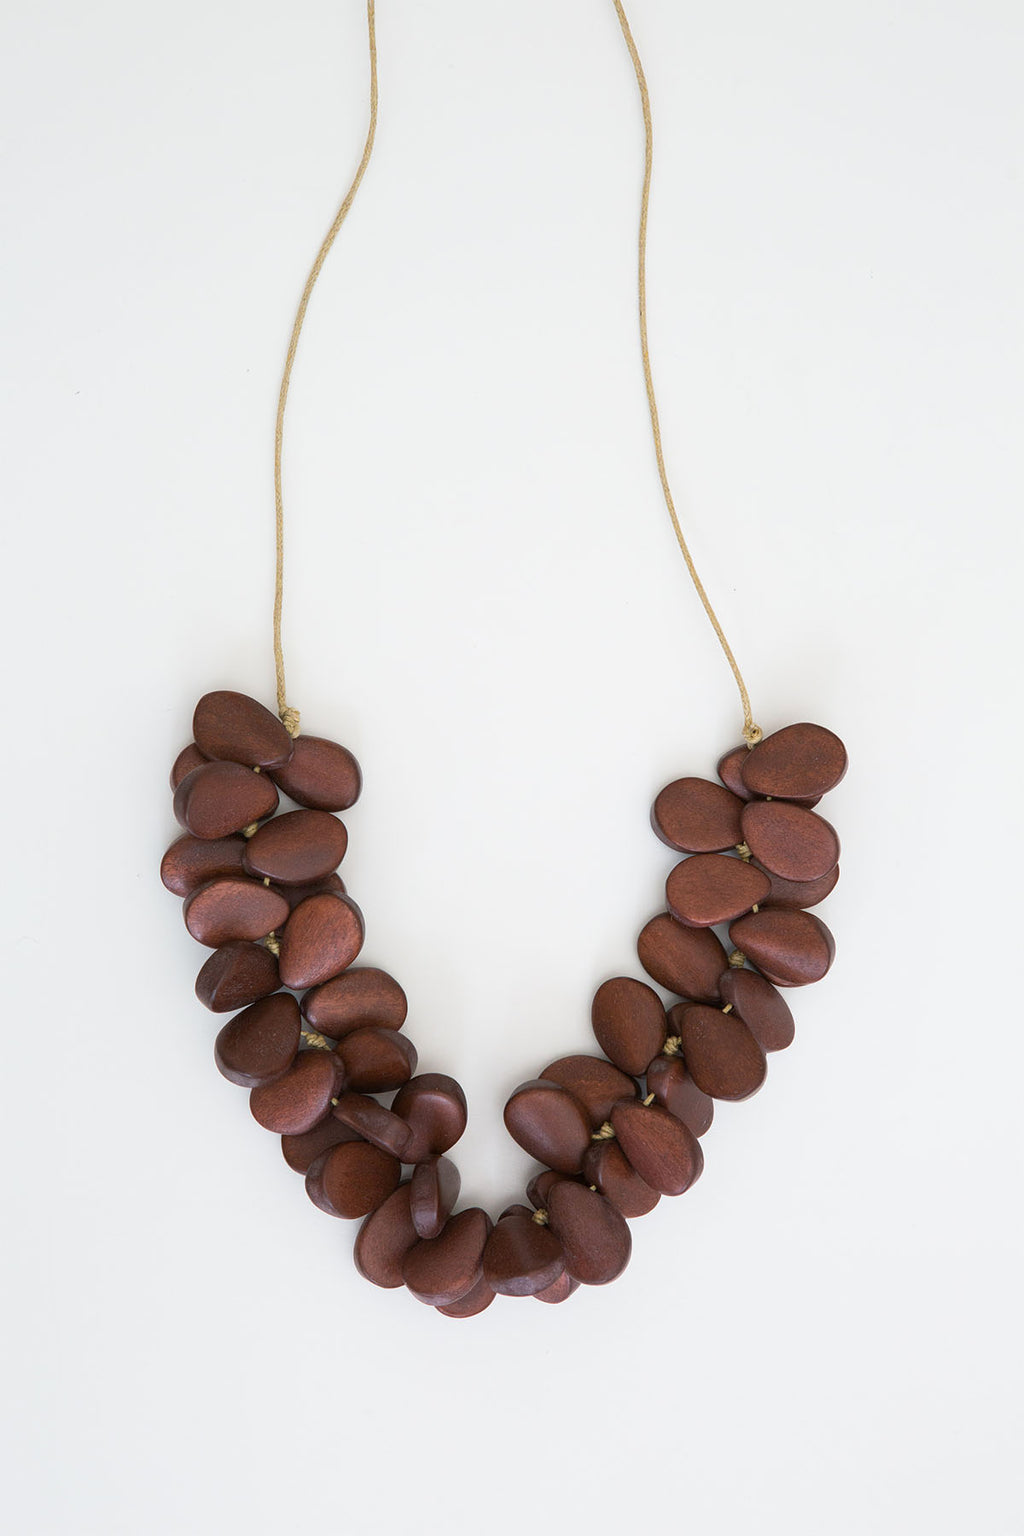 Mangrove Necklace - Clay - The Bohemian Corner